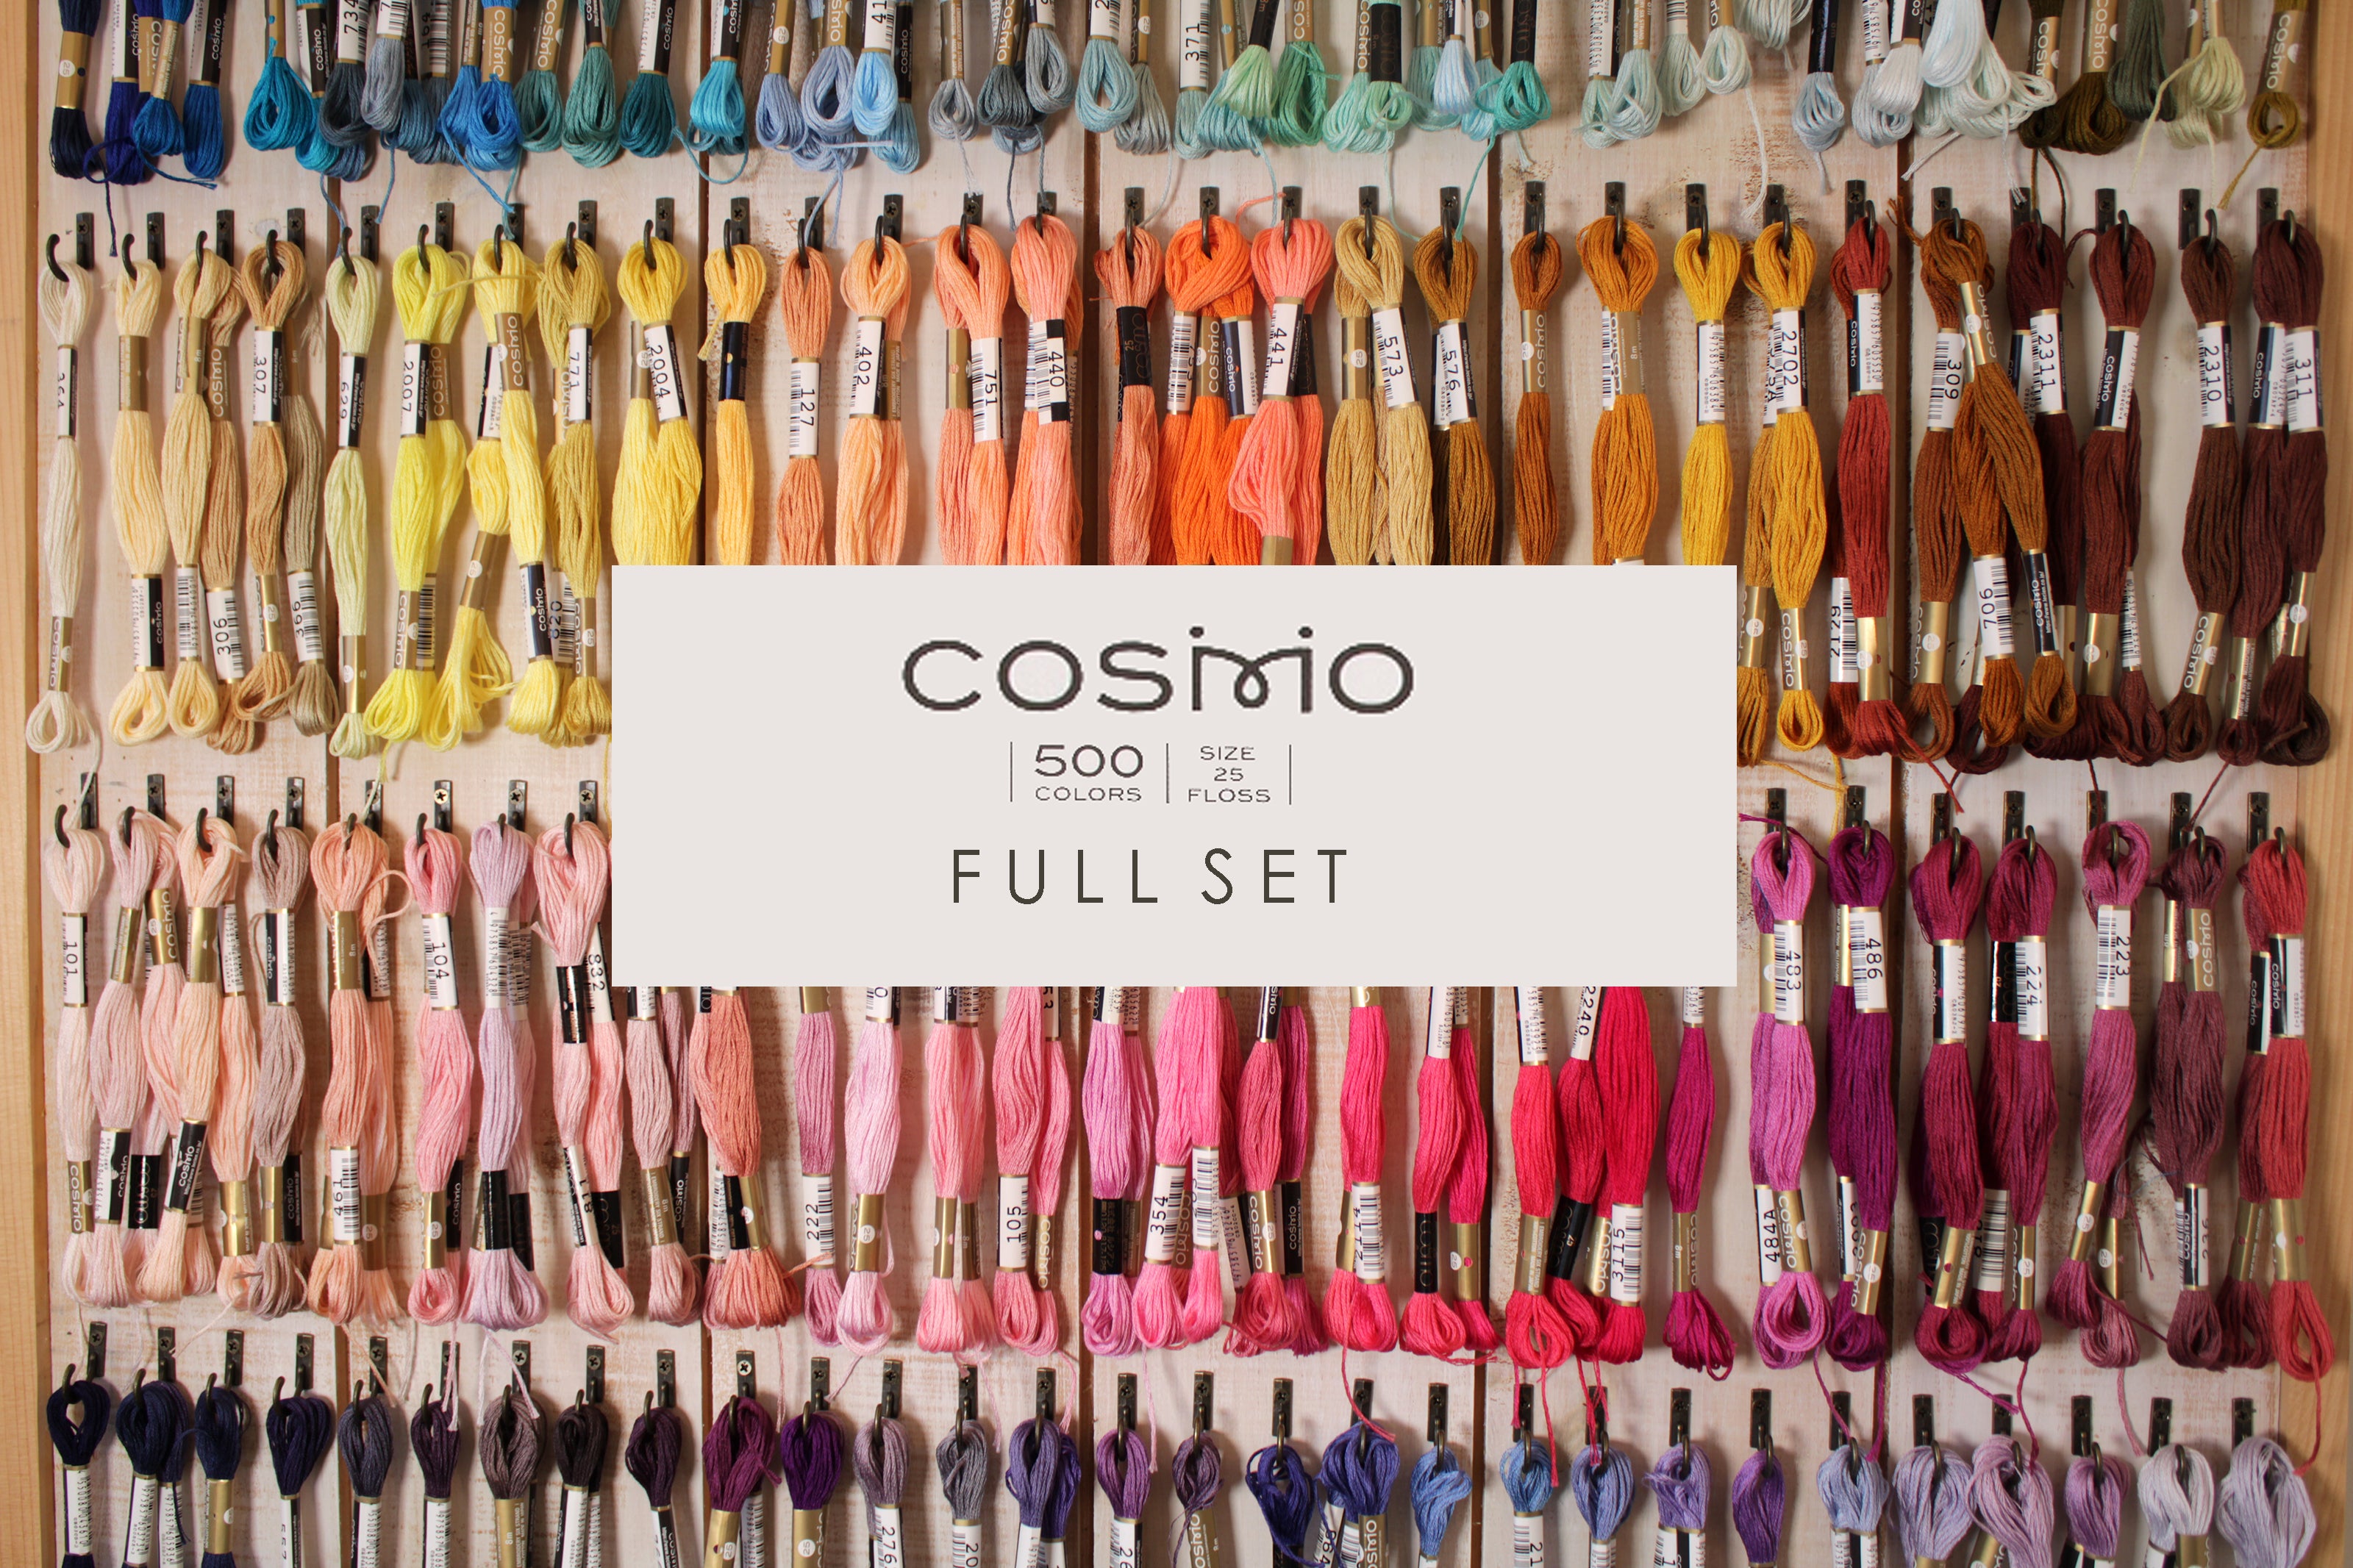 COSMO Embroidery Floss Bundle / Cosmo Thread Full Set 500 colors